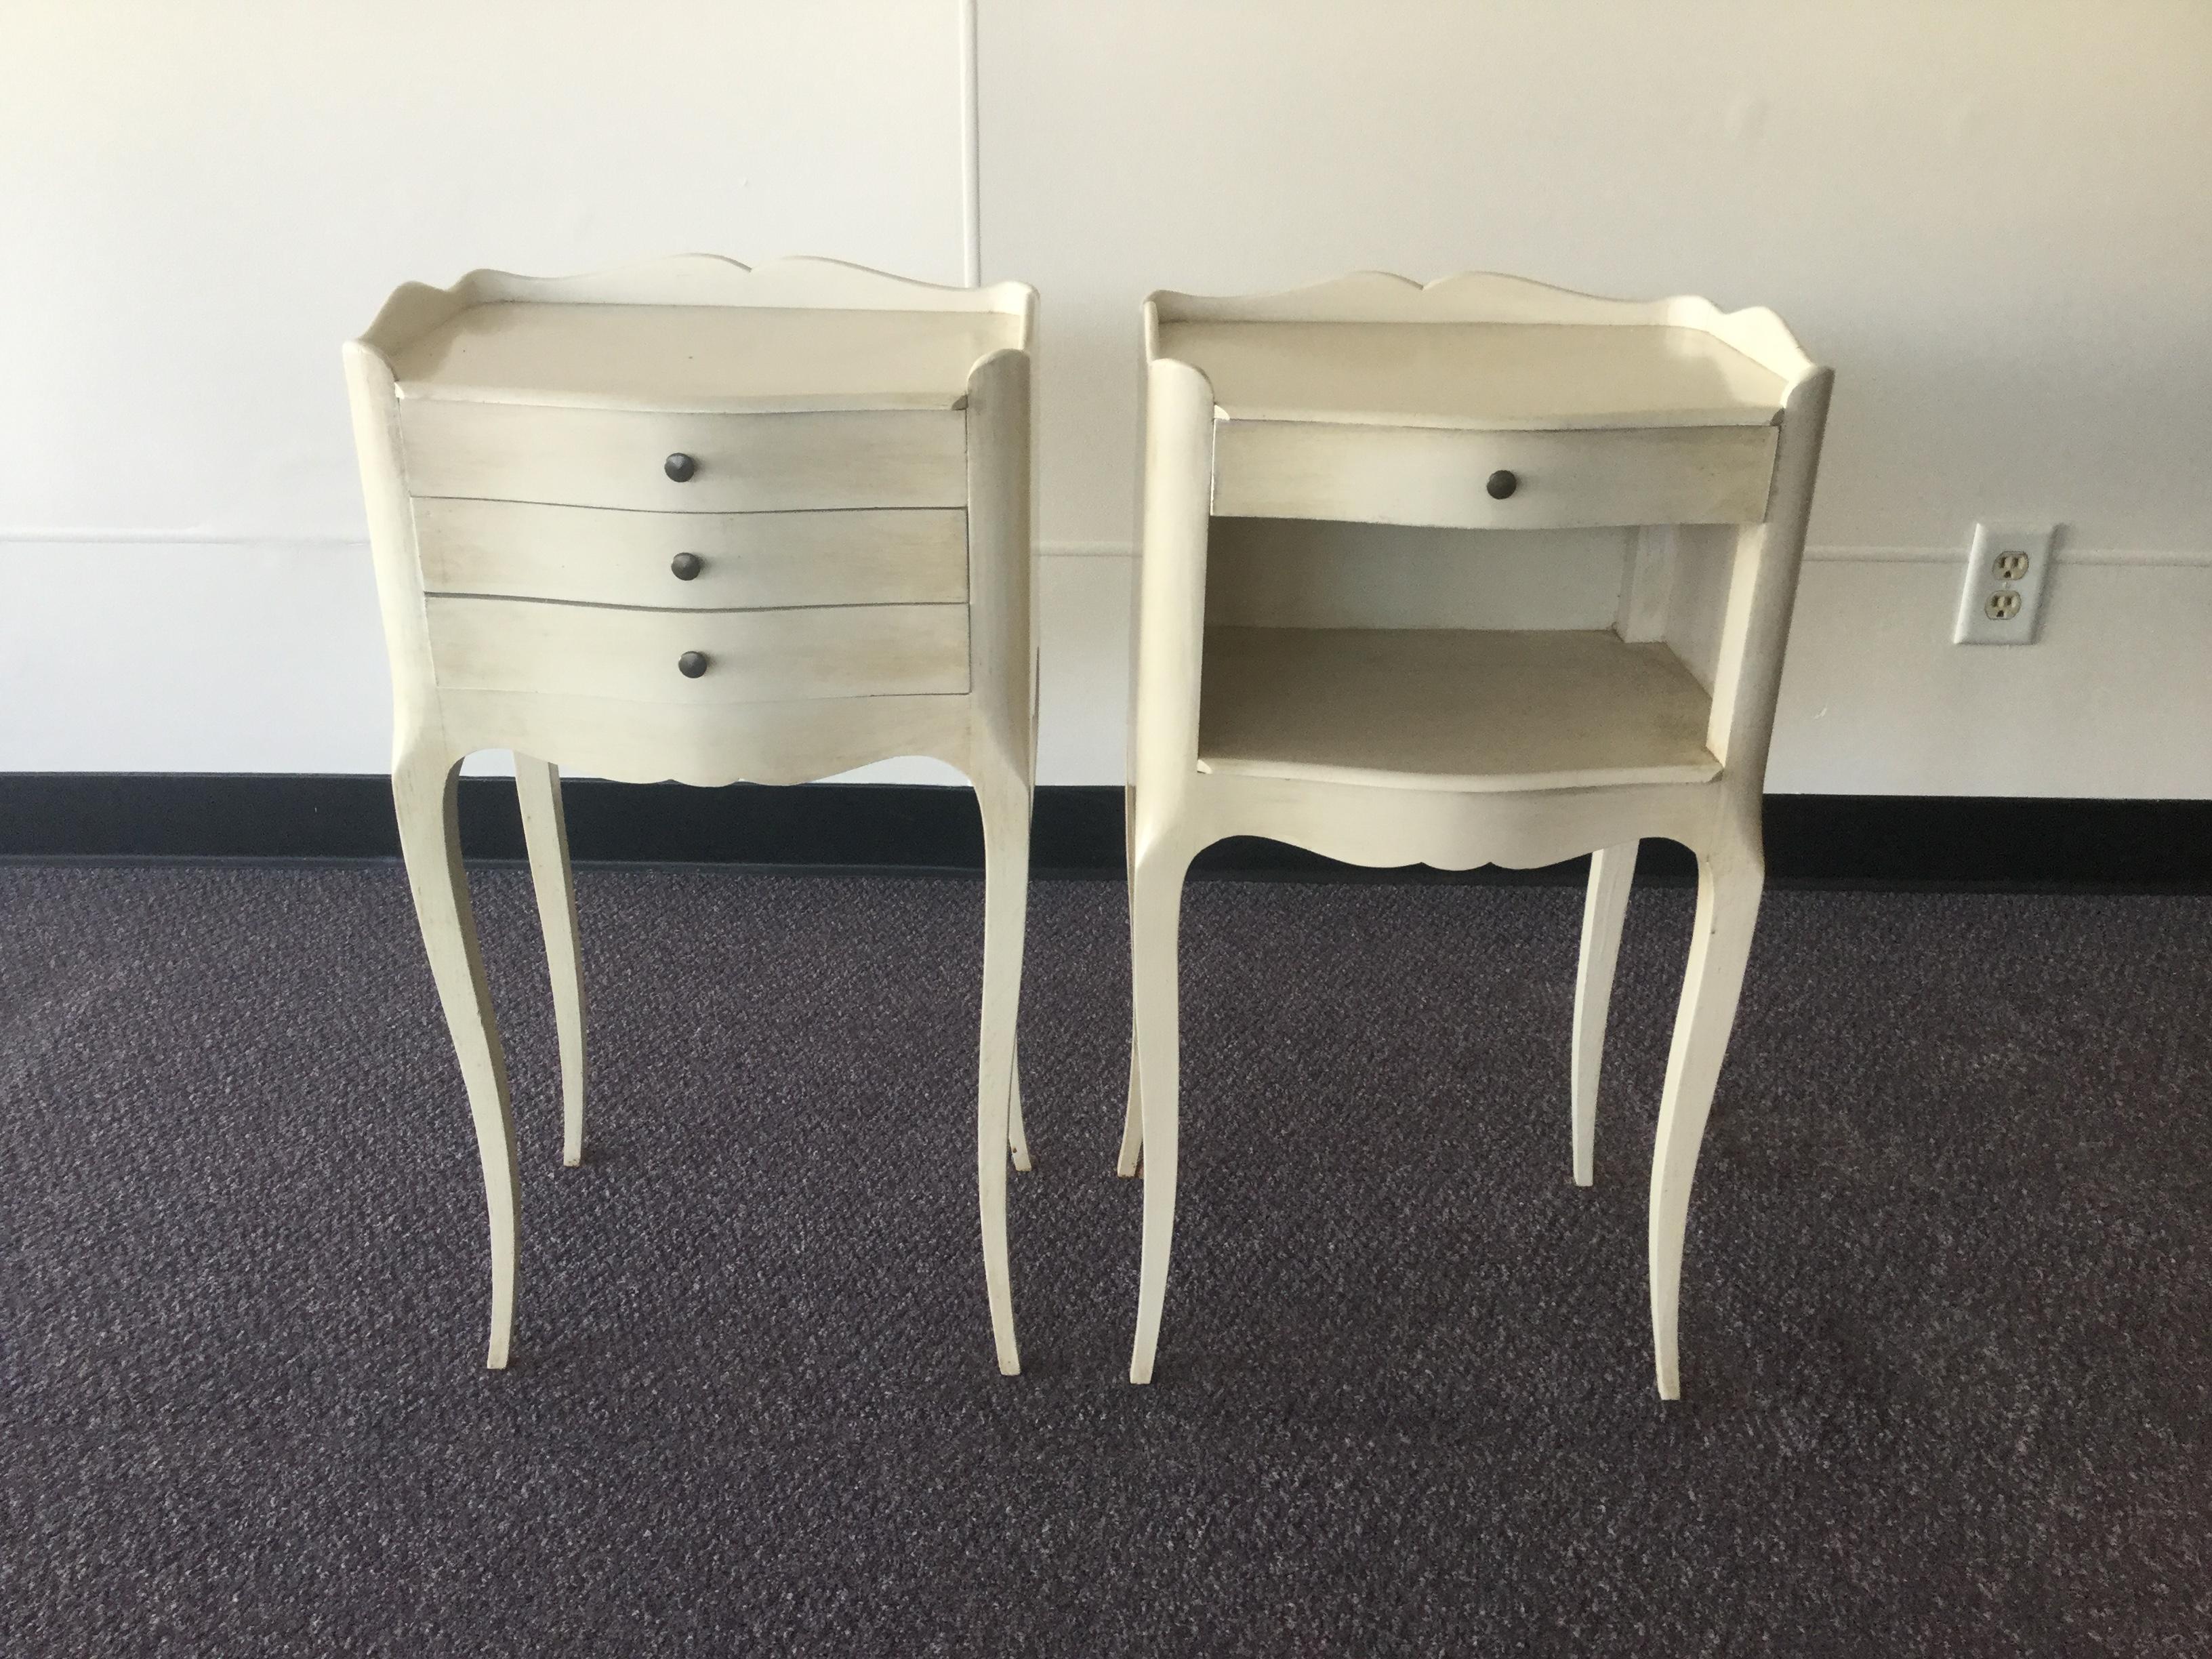 Pair of hand painted vintage French side-tables from the Brittany region of France. Made of cherrywood, these small tables are painted off-white and feature antique brass hardware. One table has three drawers and the 2nd features one drawer and an